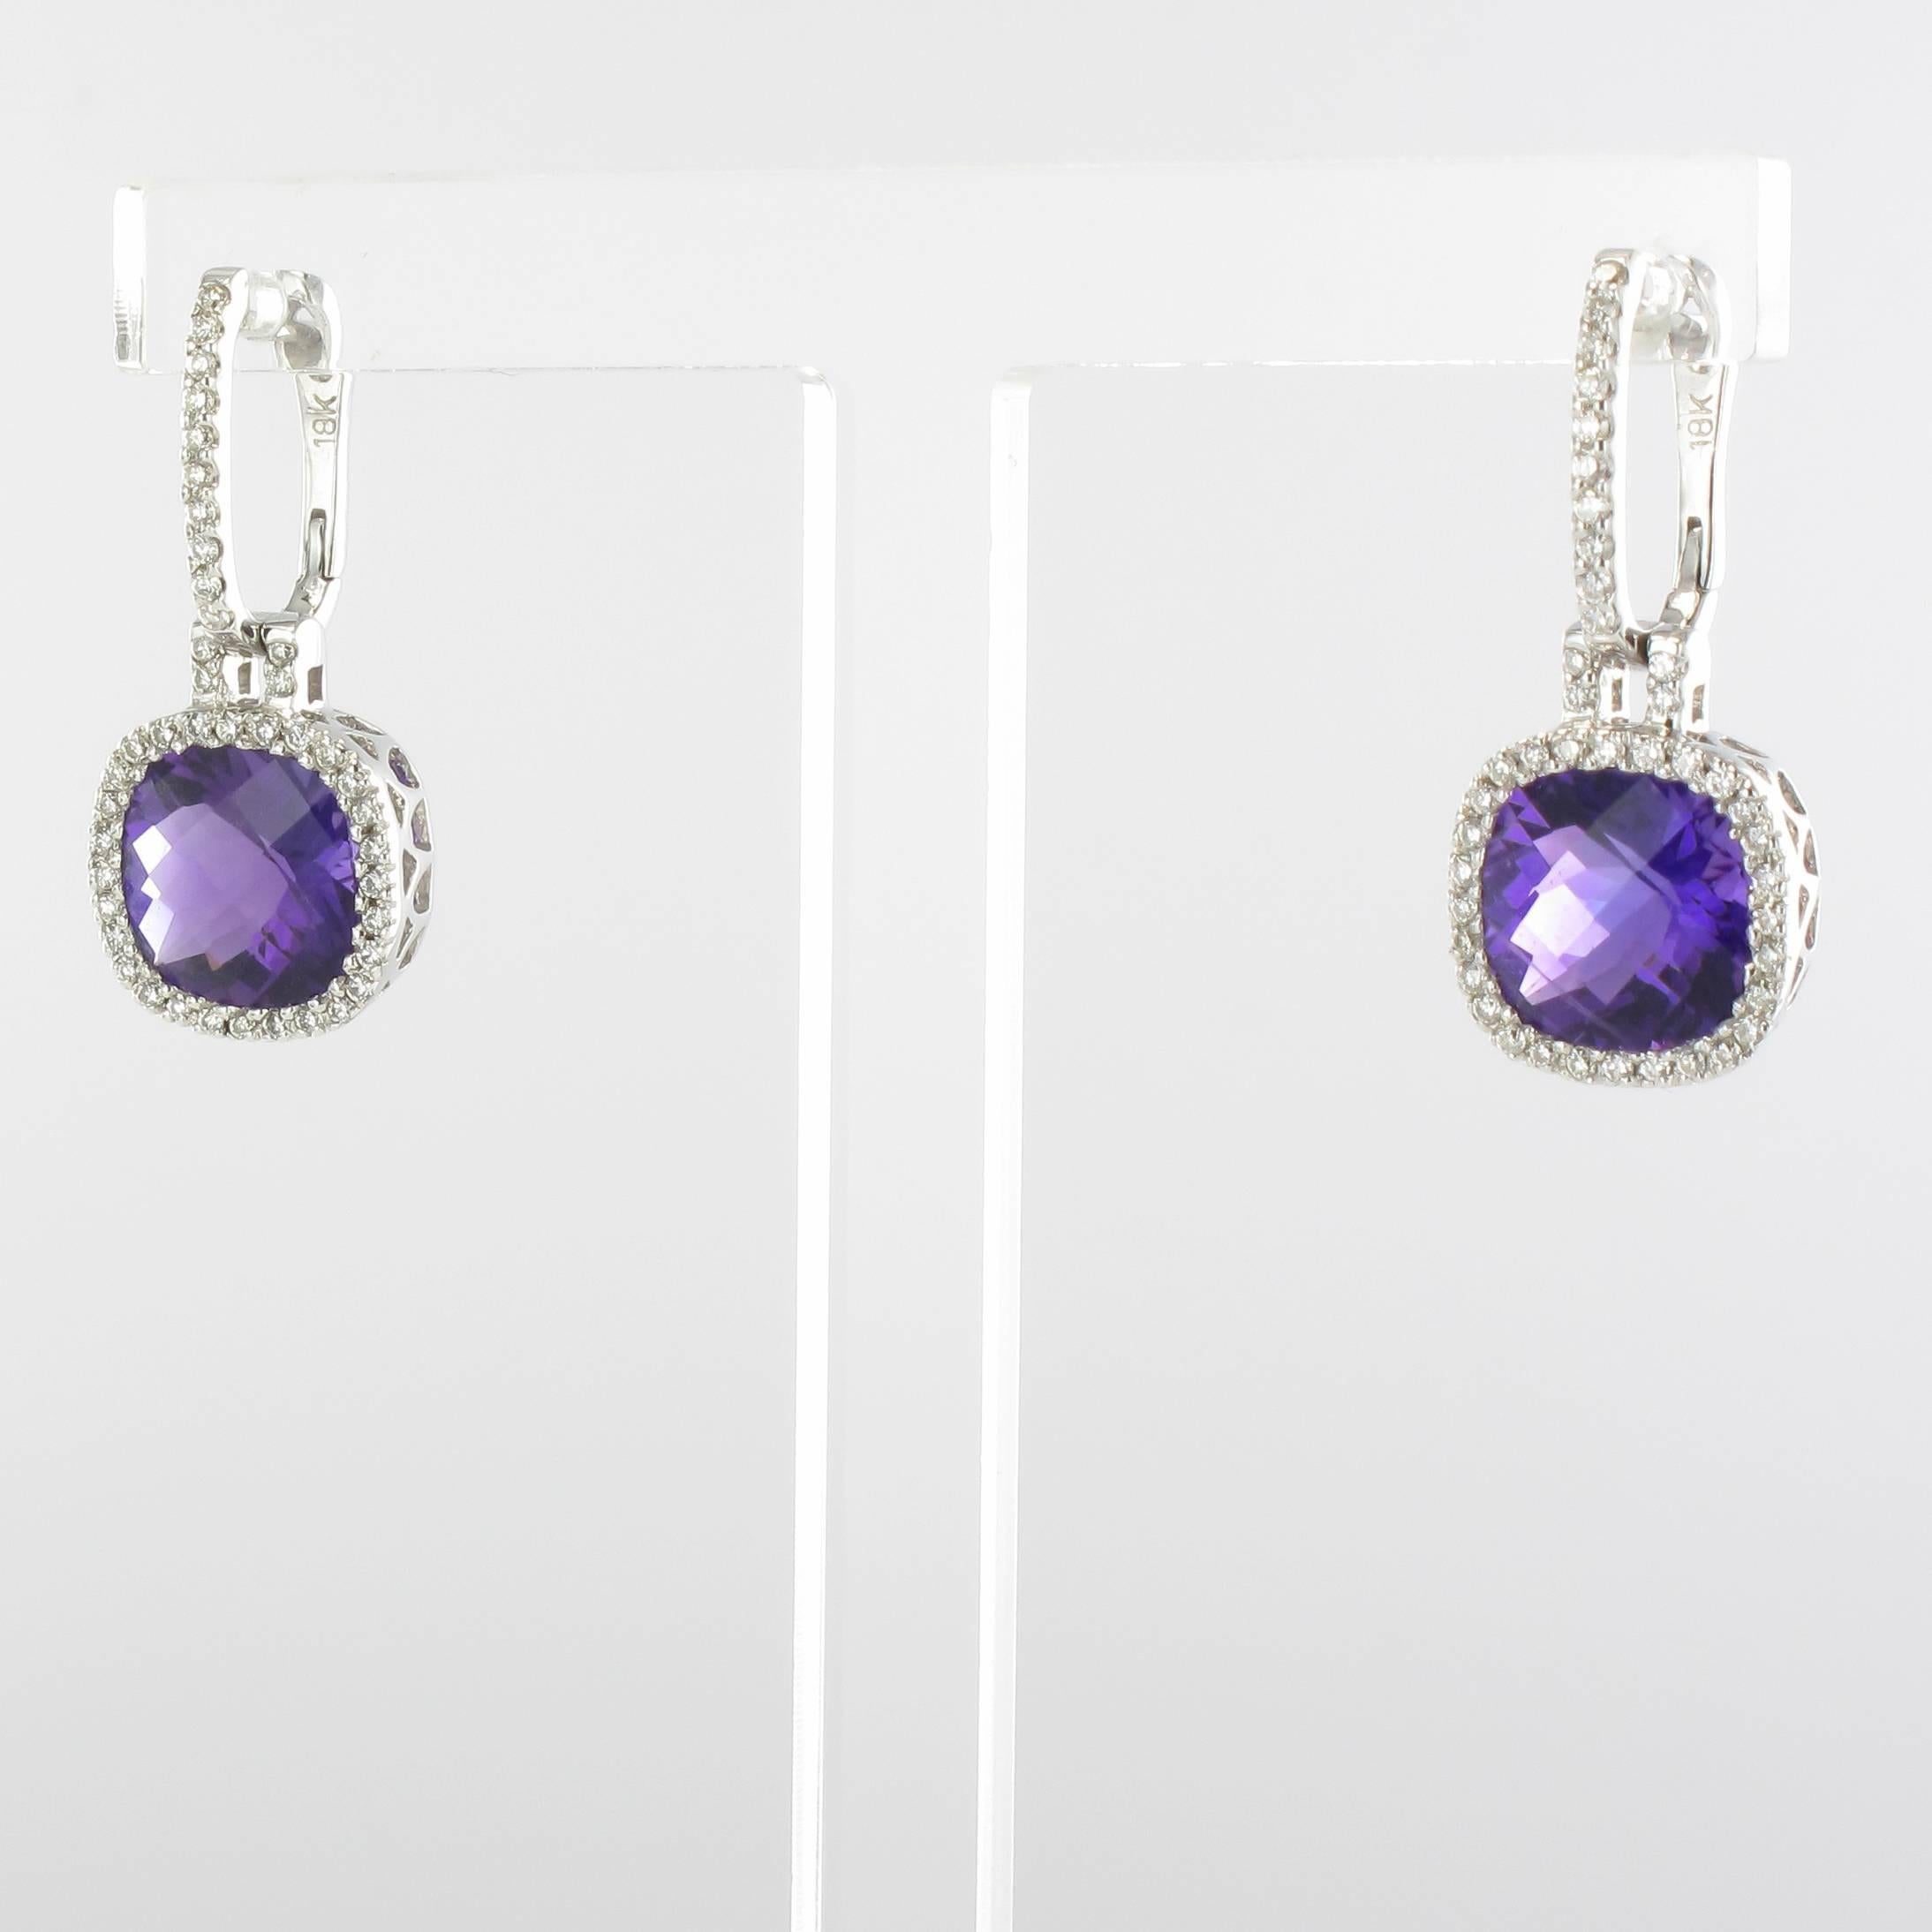 Earrings in 18 carat white gold, eagle head hallmark.

Each white gold earring is bezel set with a cushion cut amethyst surrounded by brilliant cut diamonds in an openwork setting decorated with arabesques. The earrings feature sleeper type